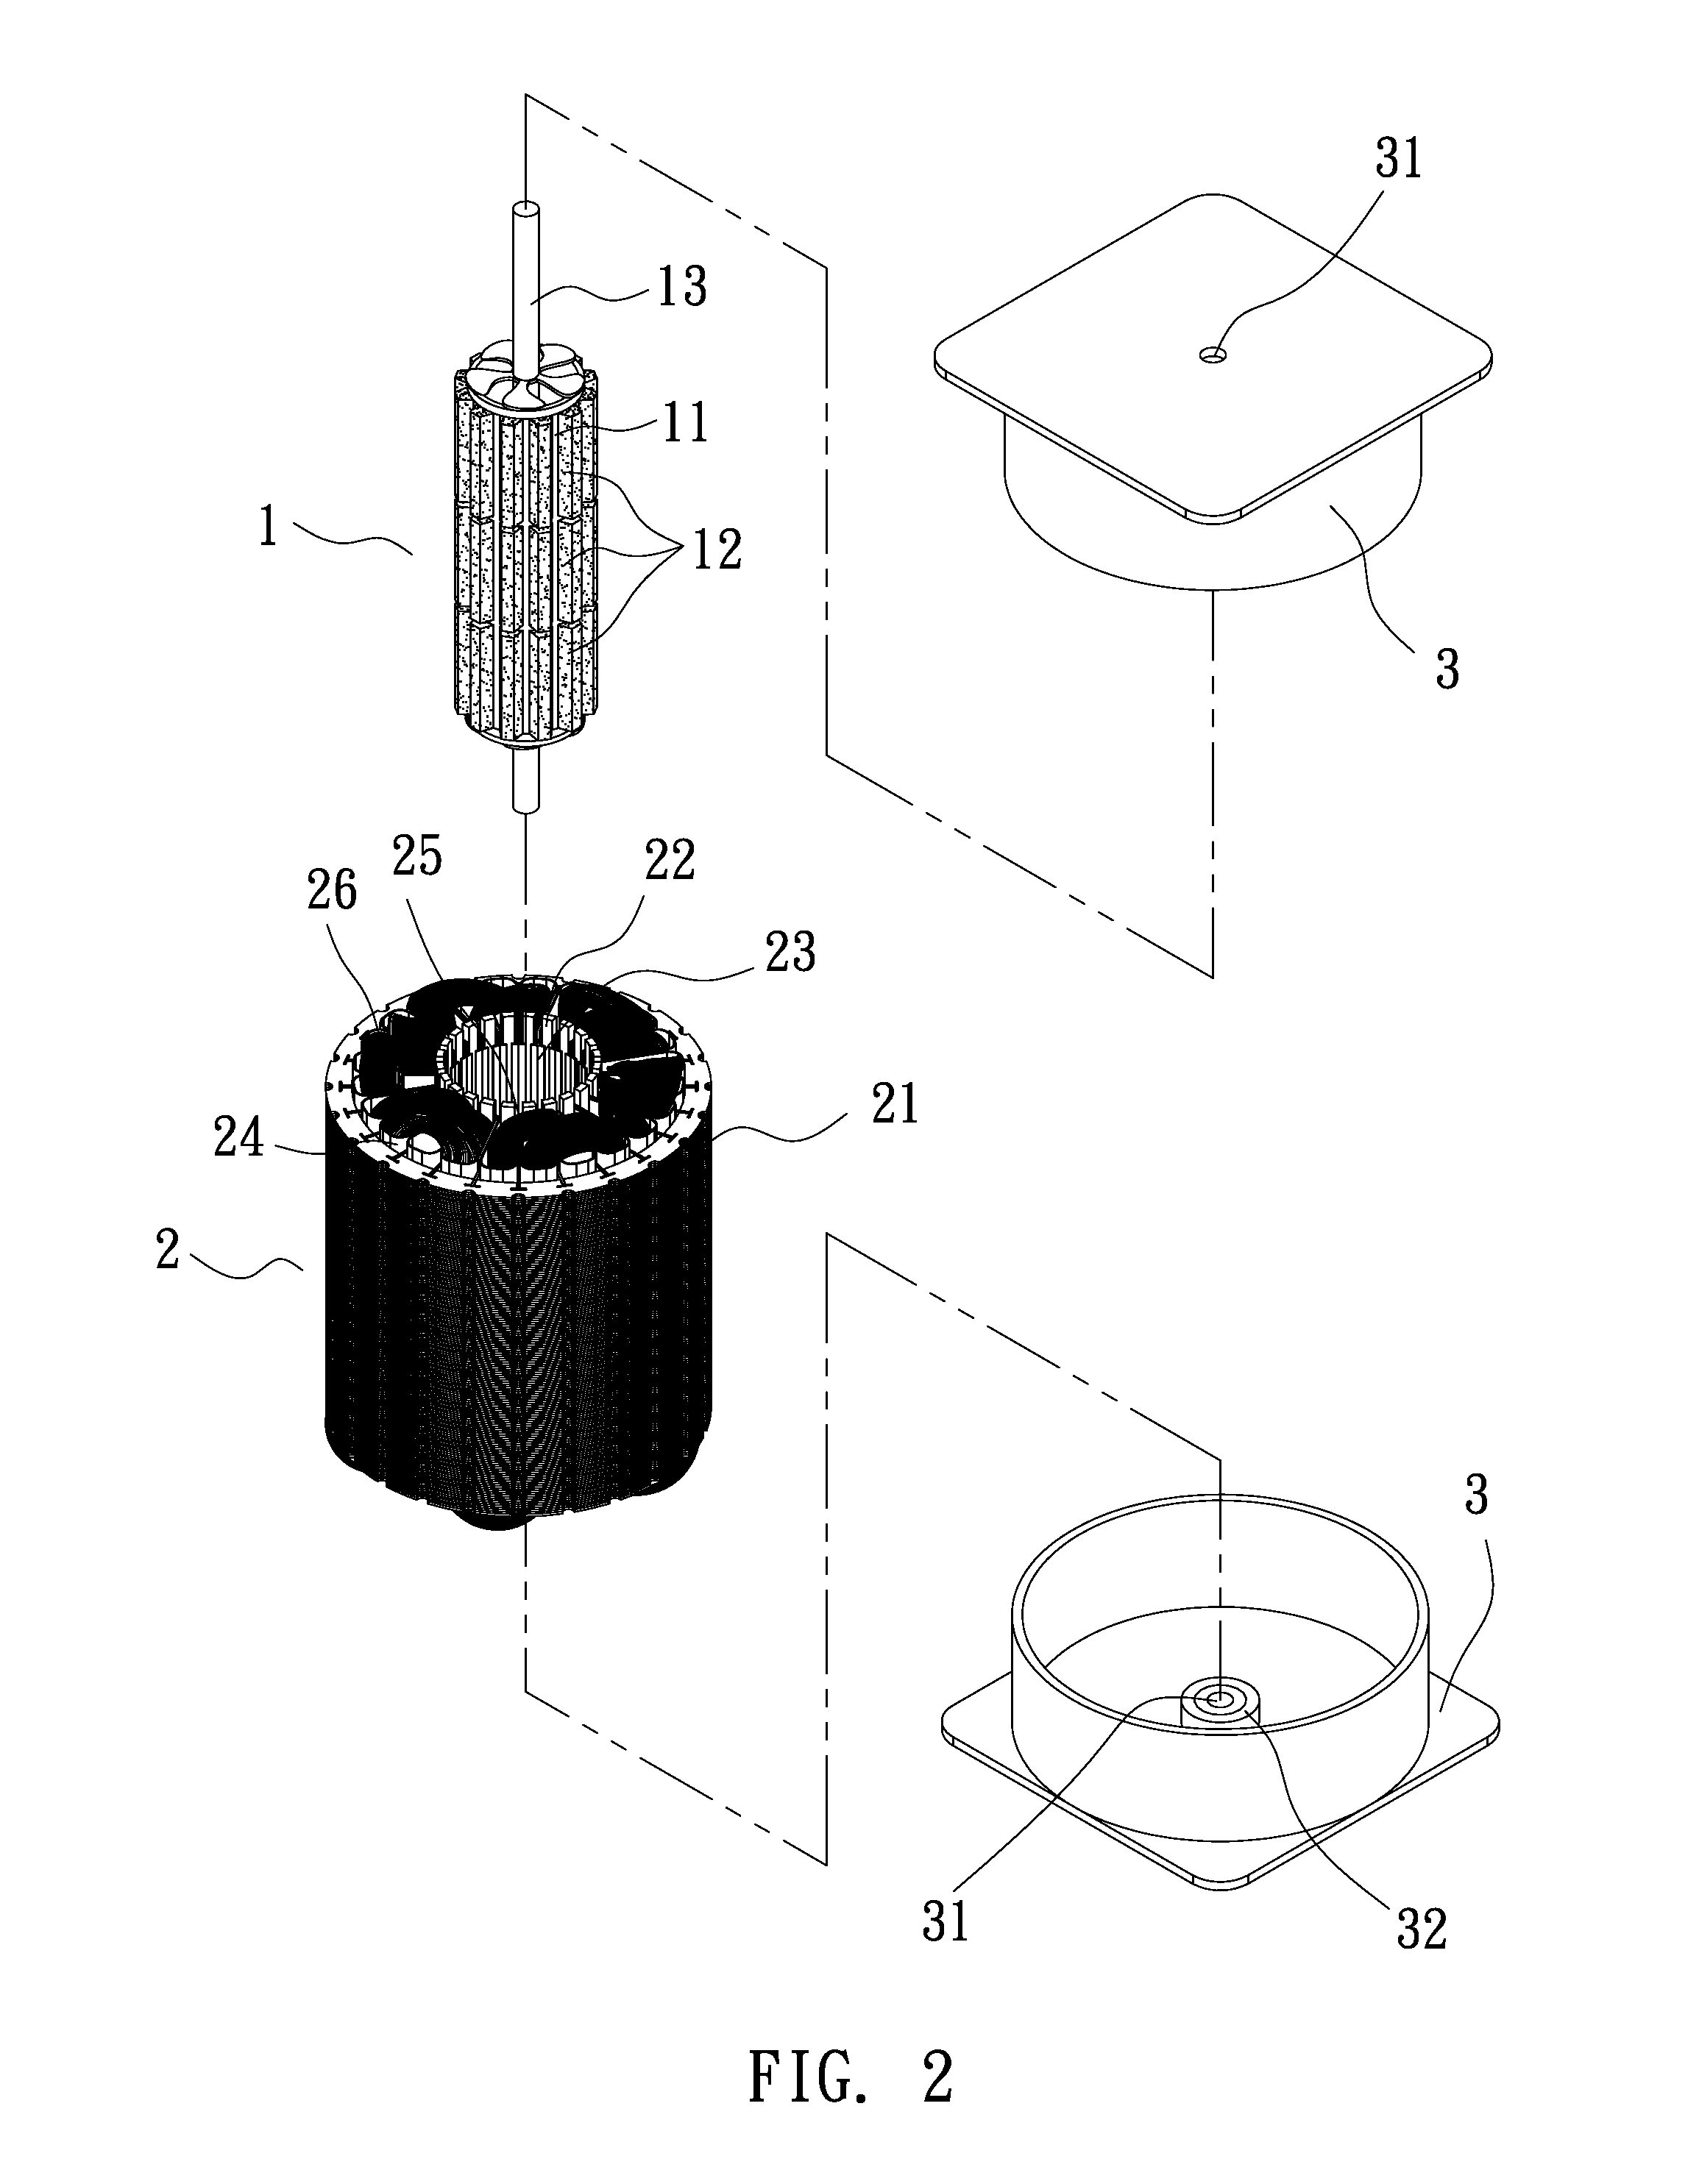 Electricity-generating device